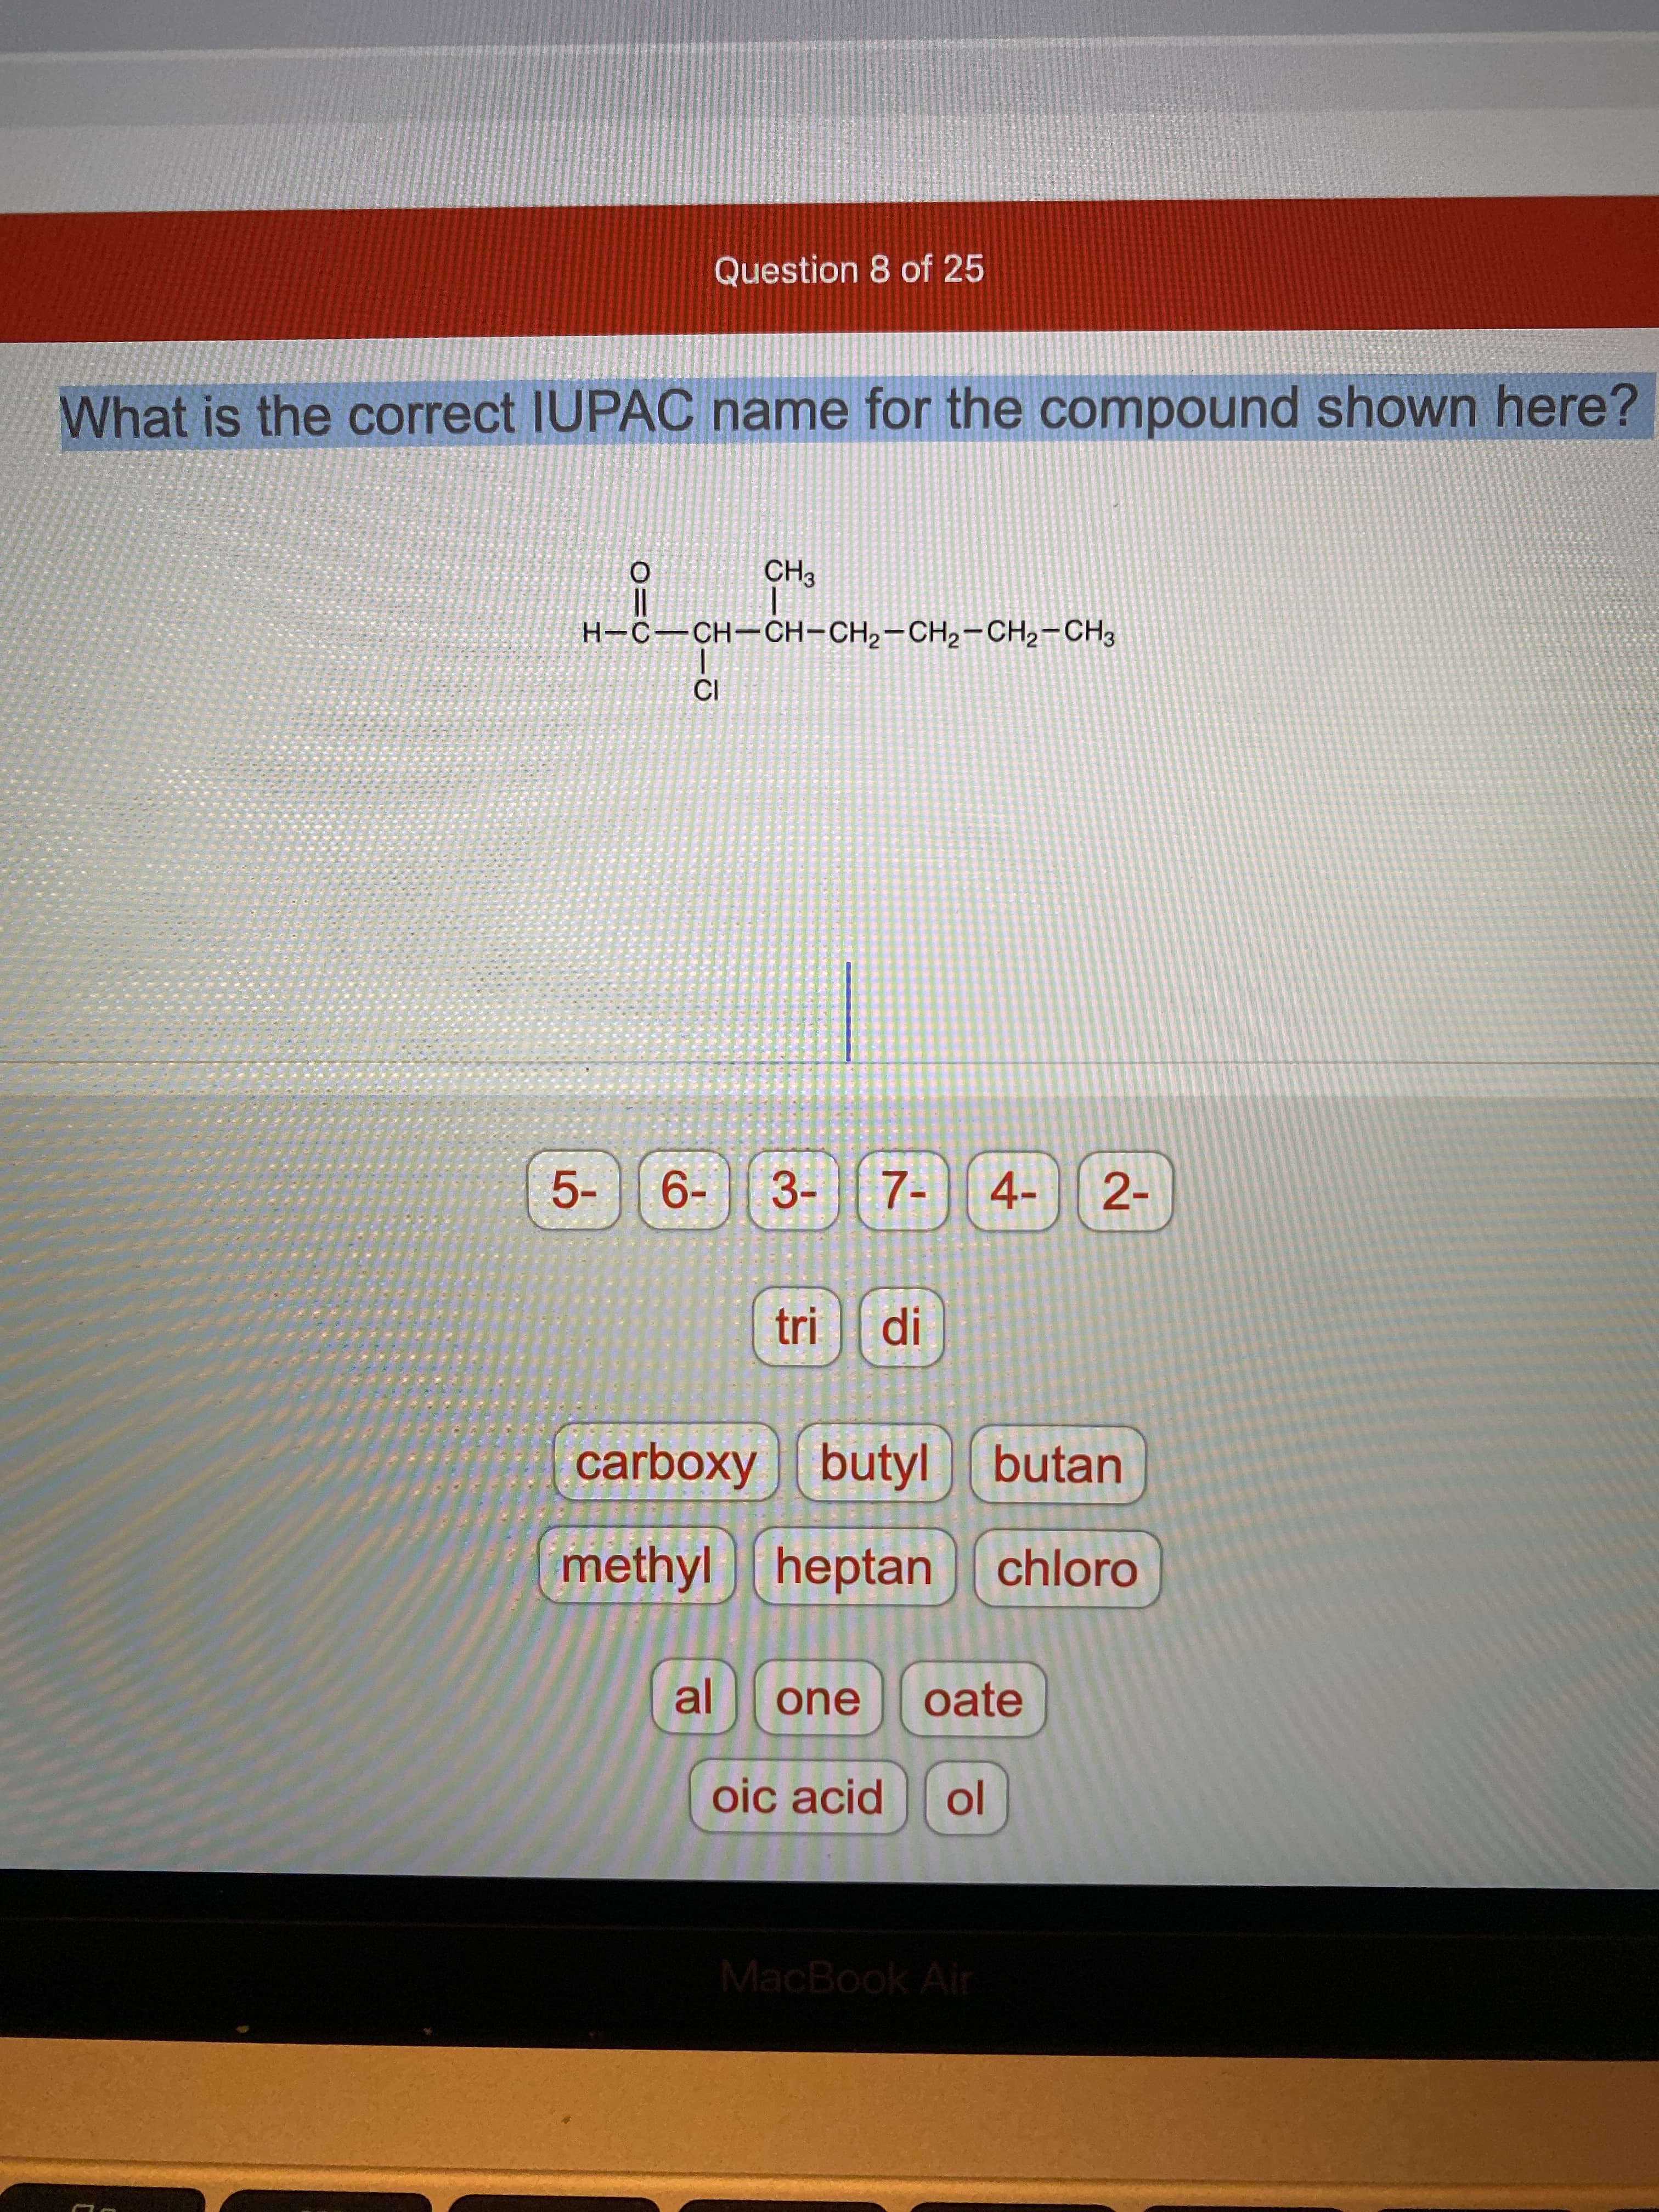 What is the correct IUPAC name for the compound shown here?
CH3
H-C-CH-CH-CH2-CH,-CH2-CH3
CI
